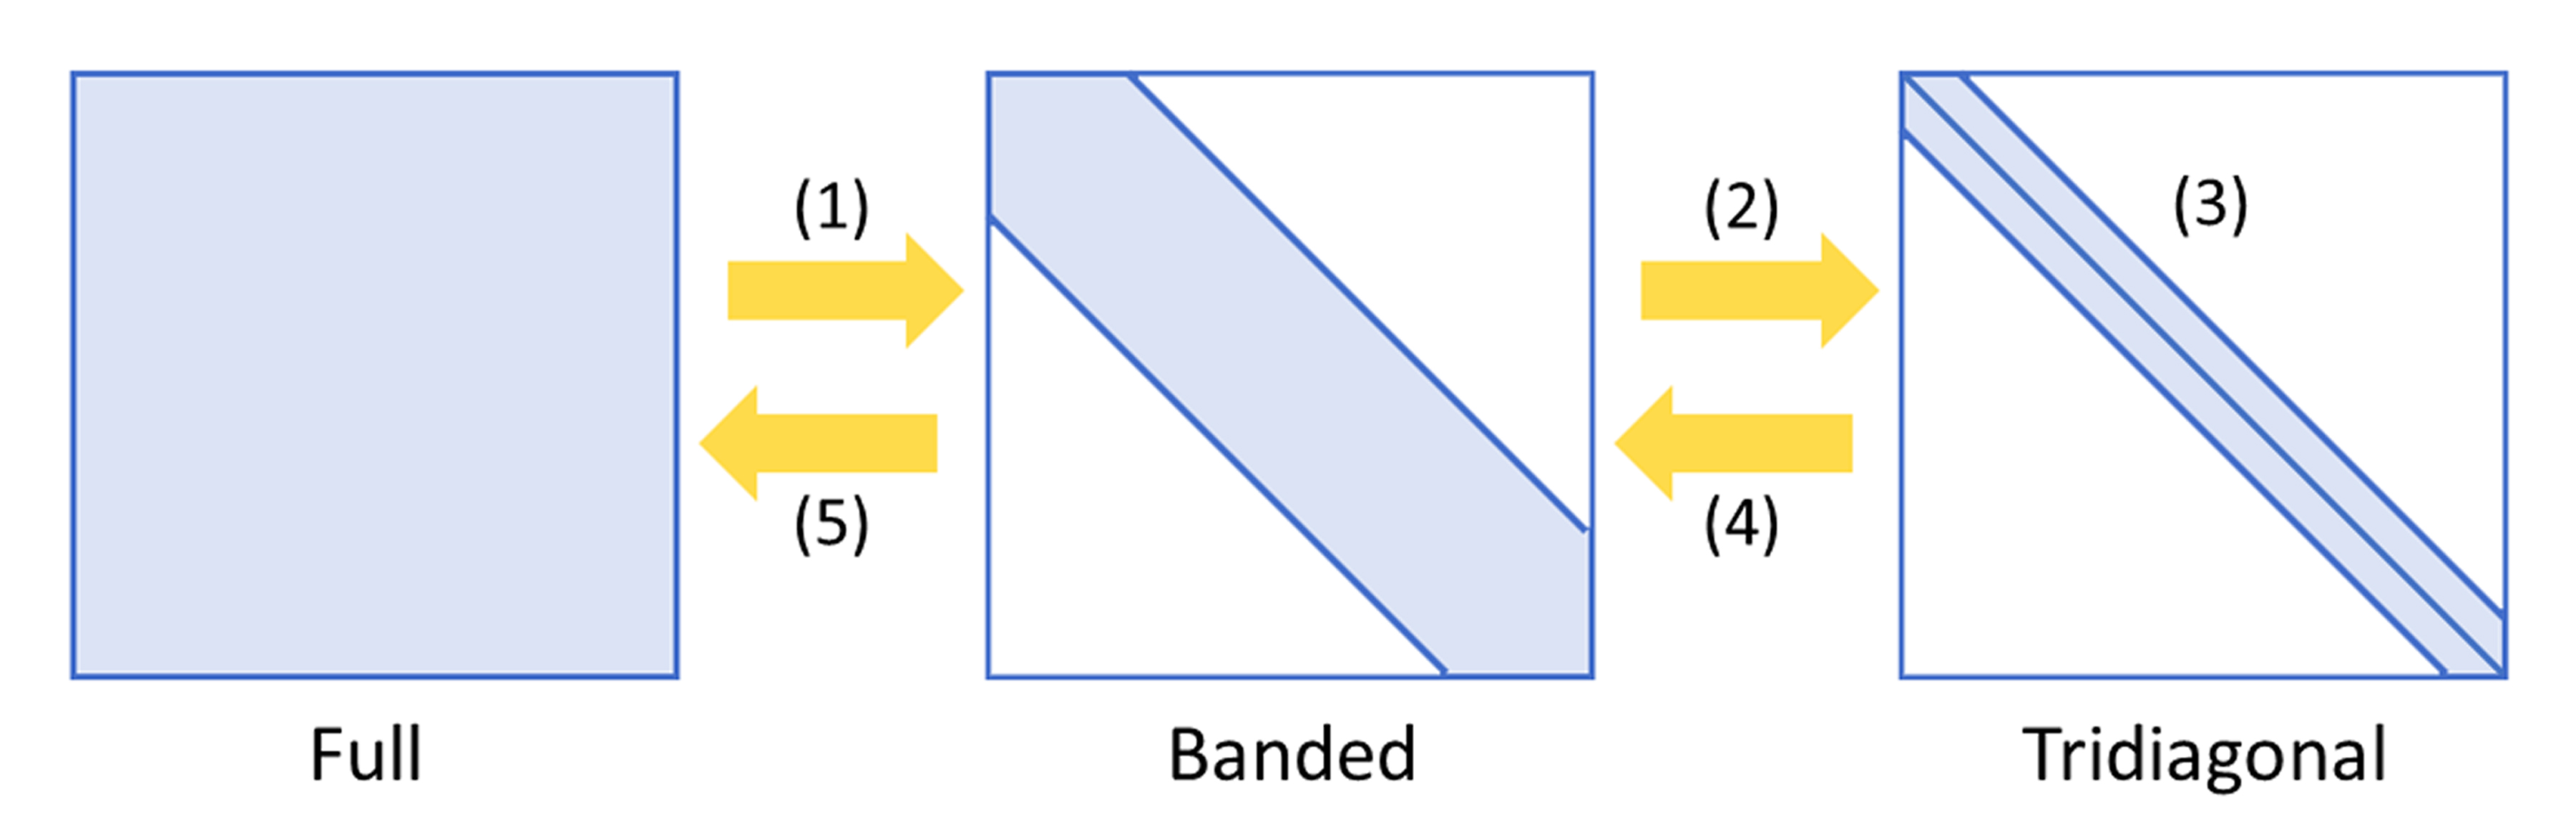 Two stage method